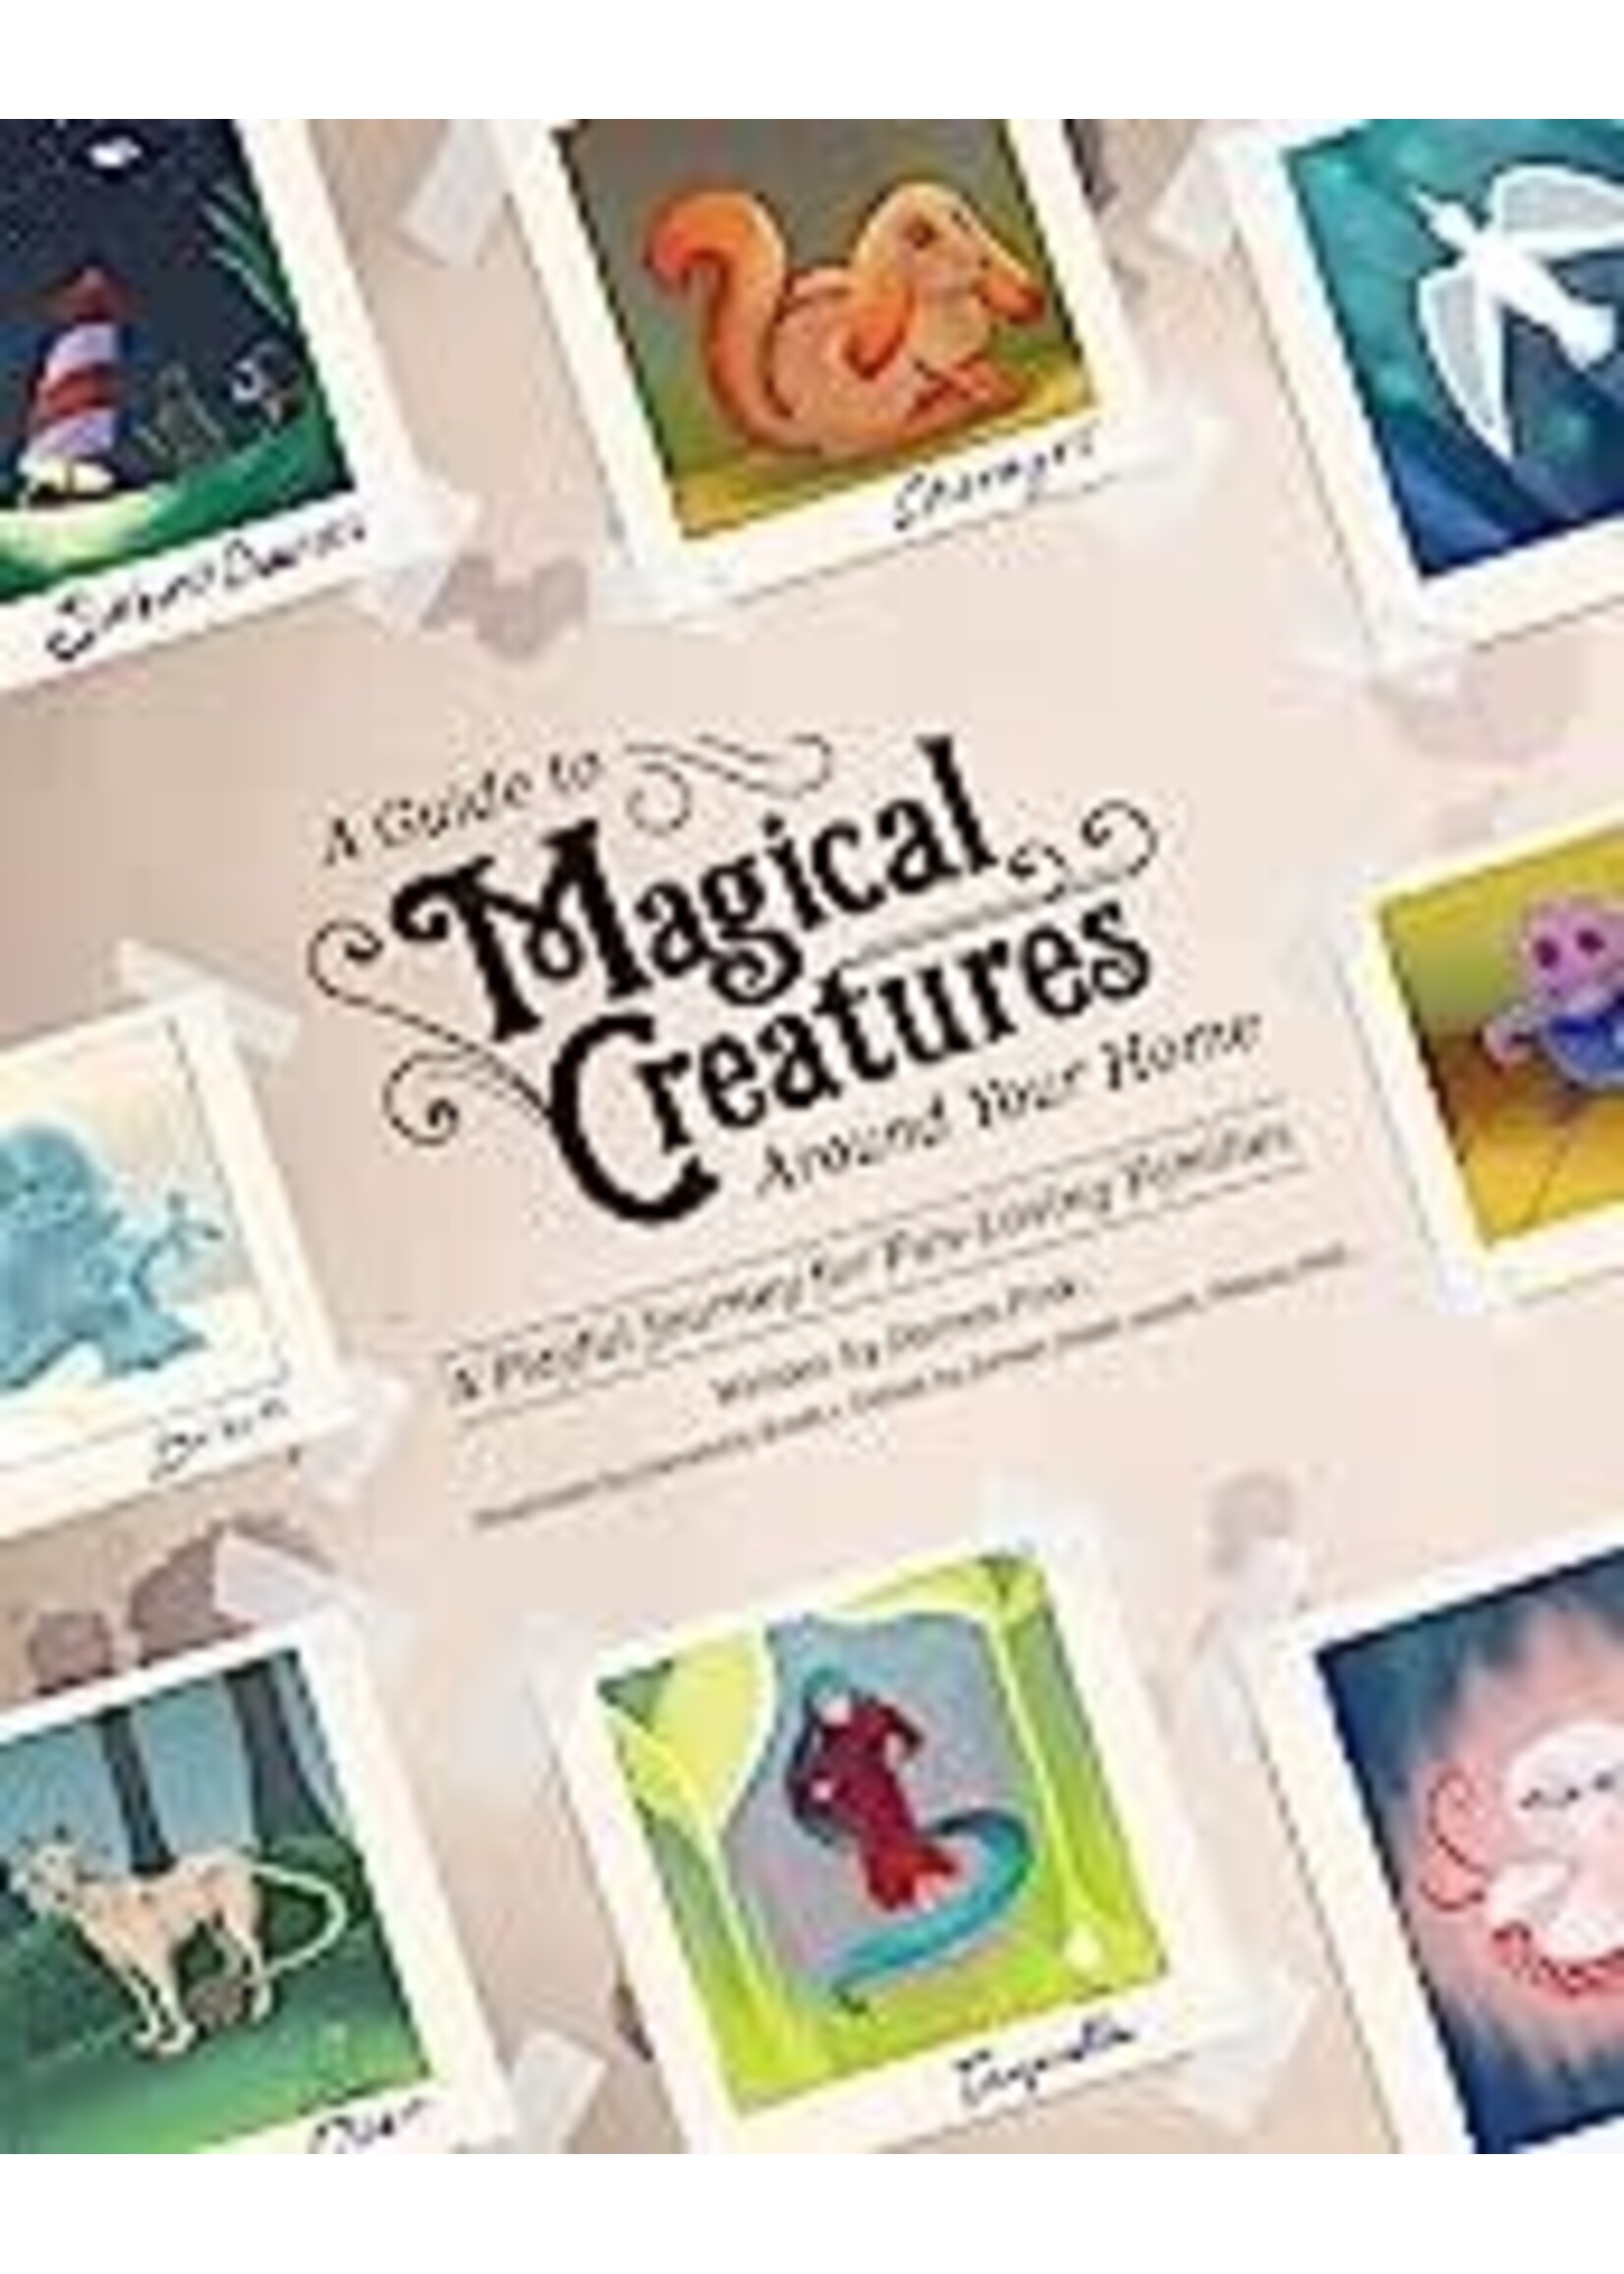 A Guide to Magical Creatures